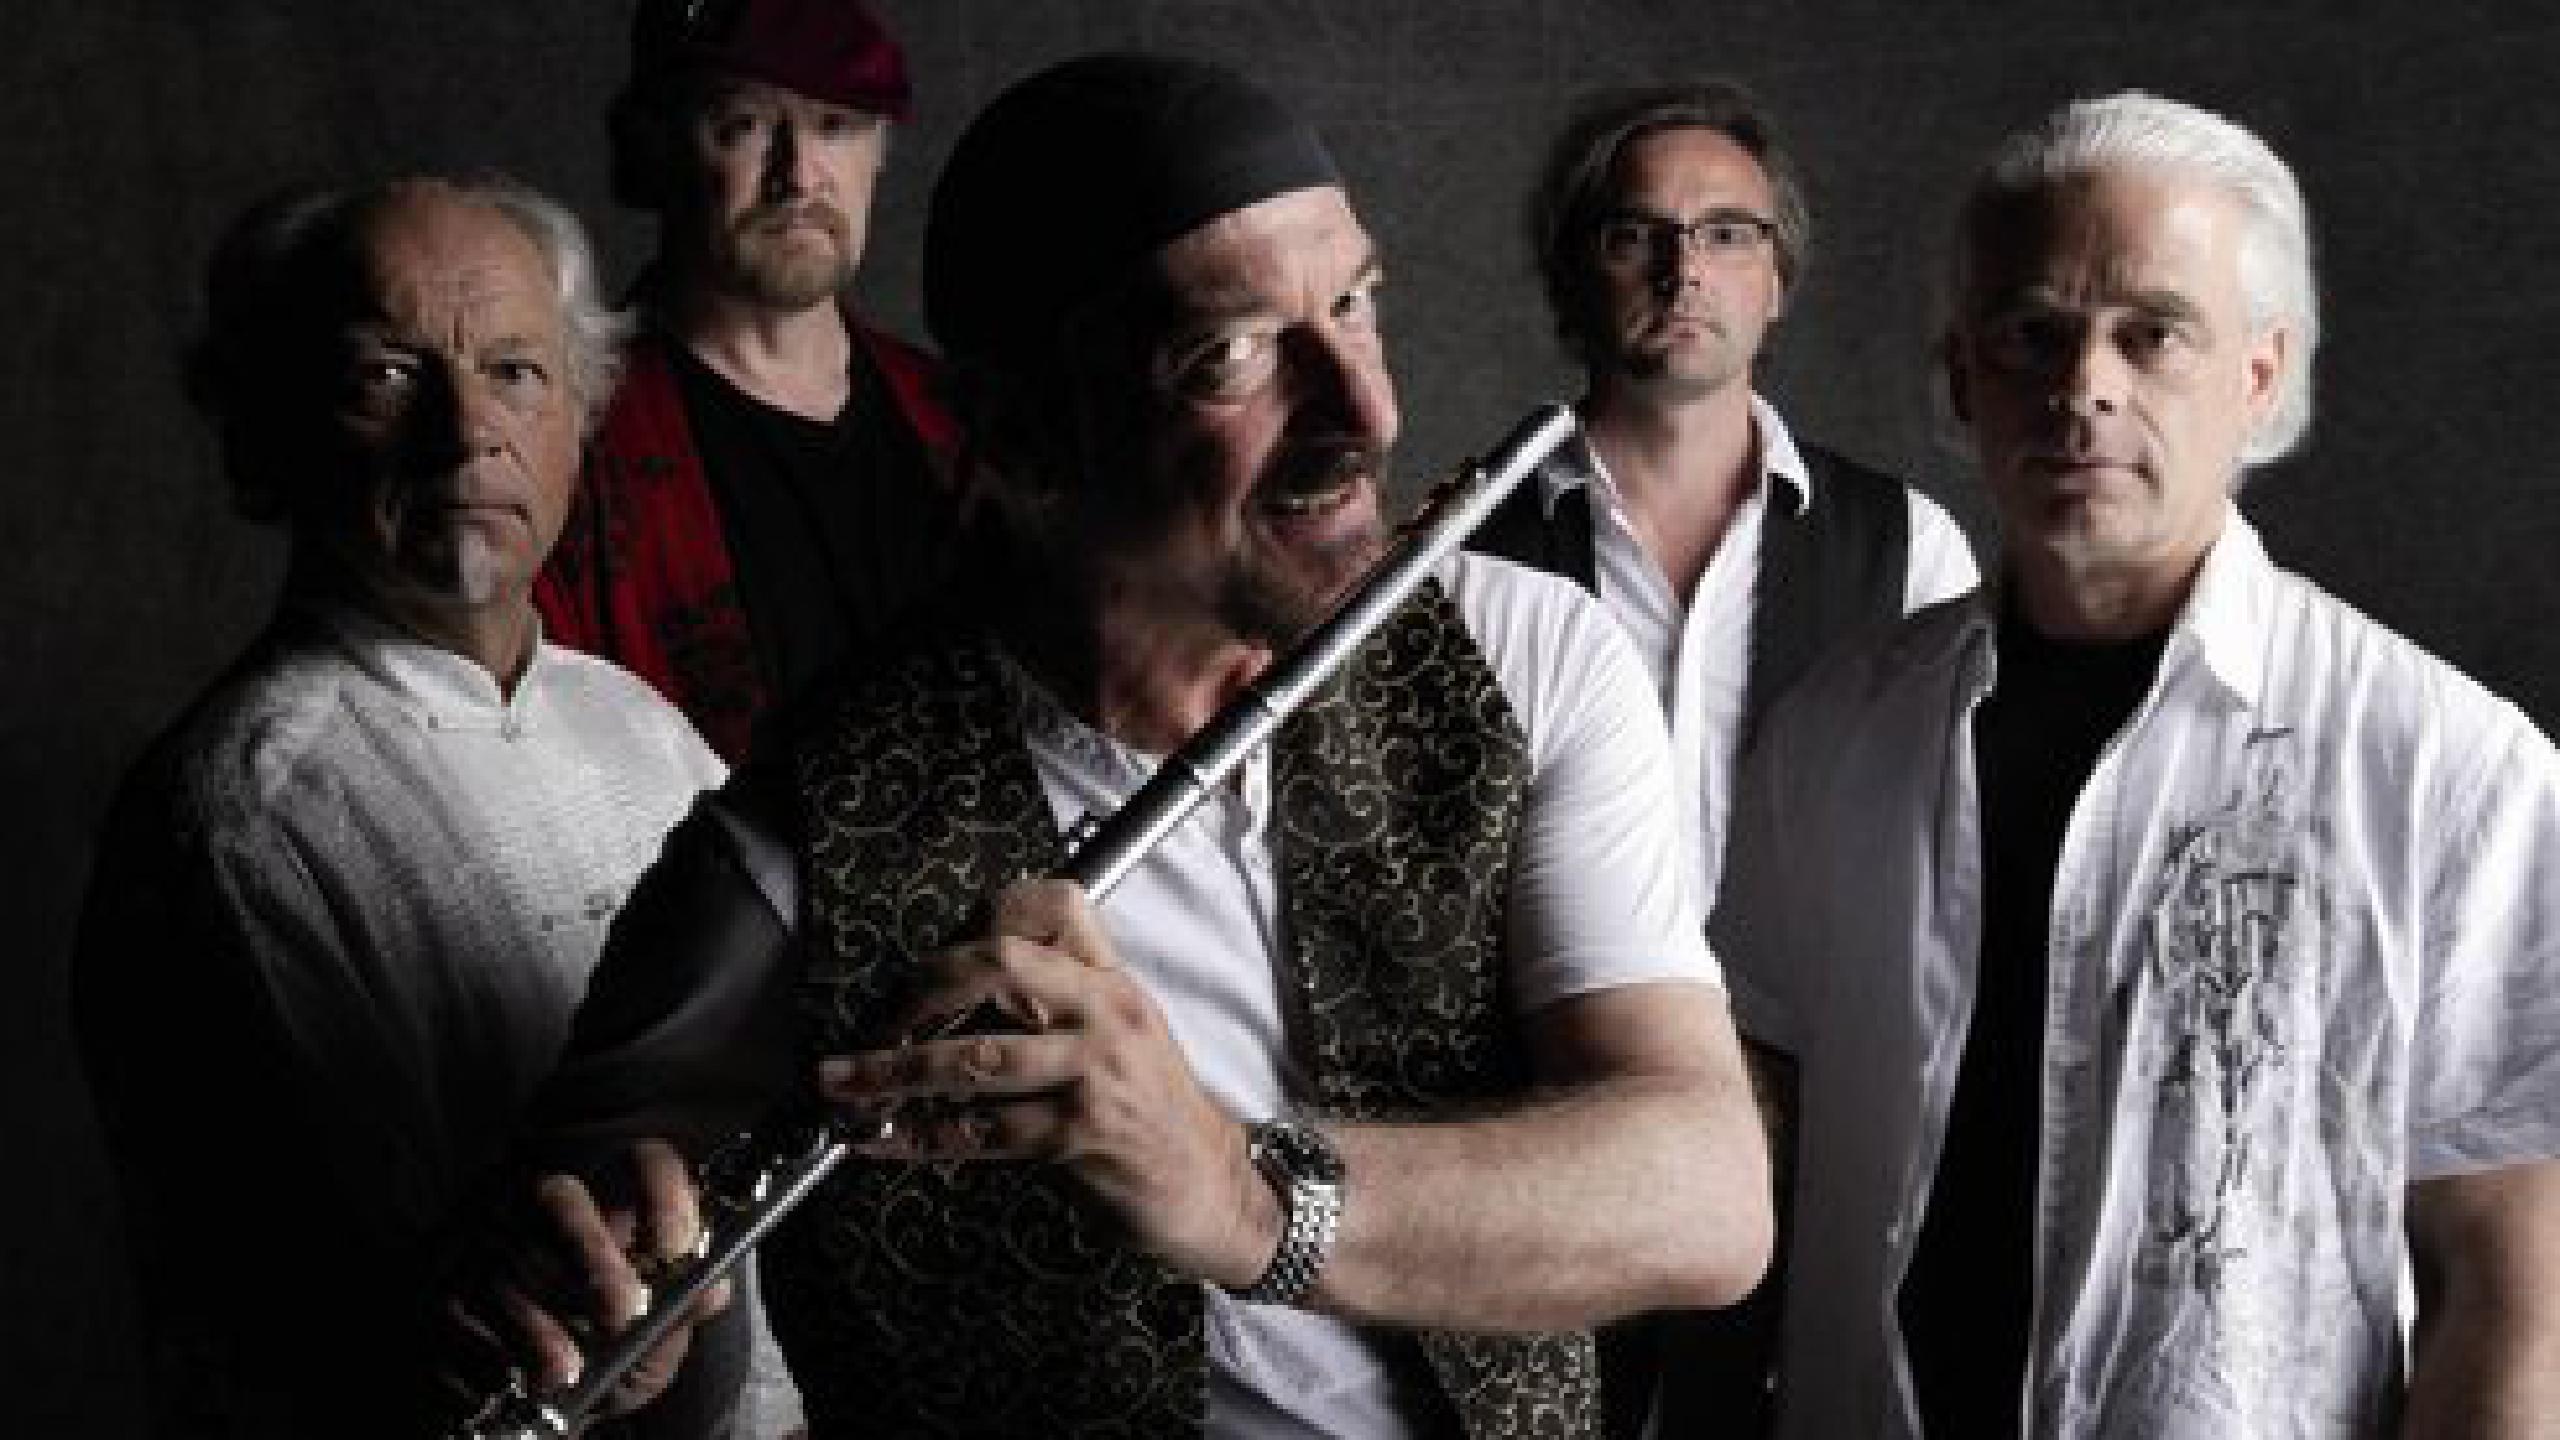 Jethro Tull tour dates 2022 2023. Jethro Tull tickets and concerts